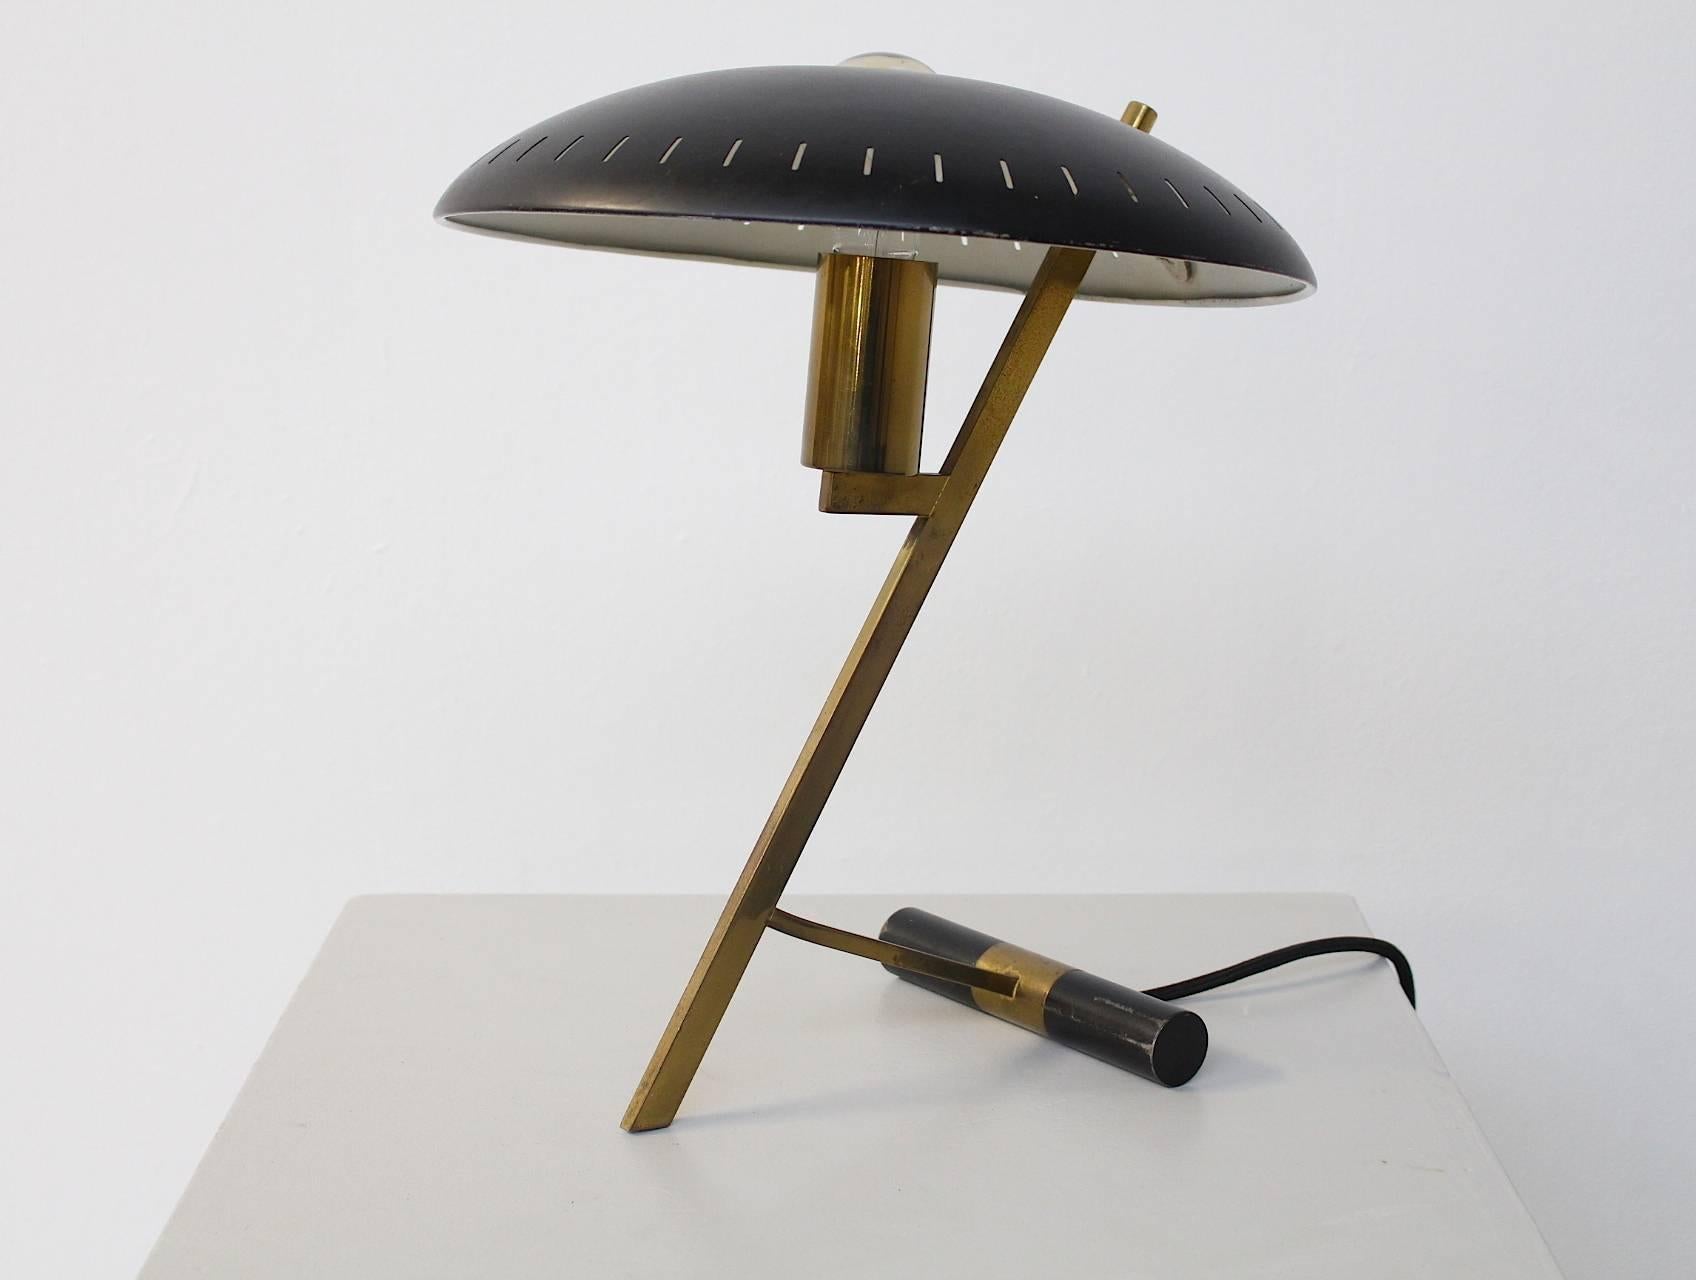 An iconic Dutch-Industrial desk or table lamp designed by designer and architect Louis Kalff; for the Philips Company, Holland, 1955. This is the first edition with a brass frame and the black disk shaped perforated black lacquered shade. The shade